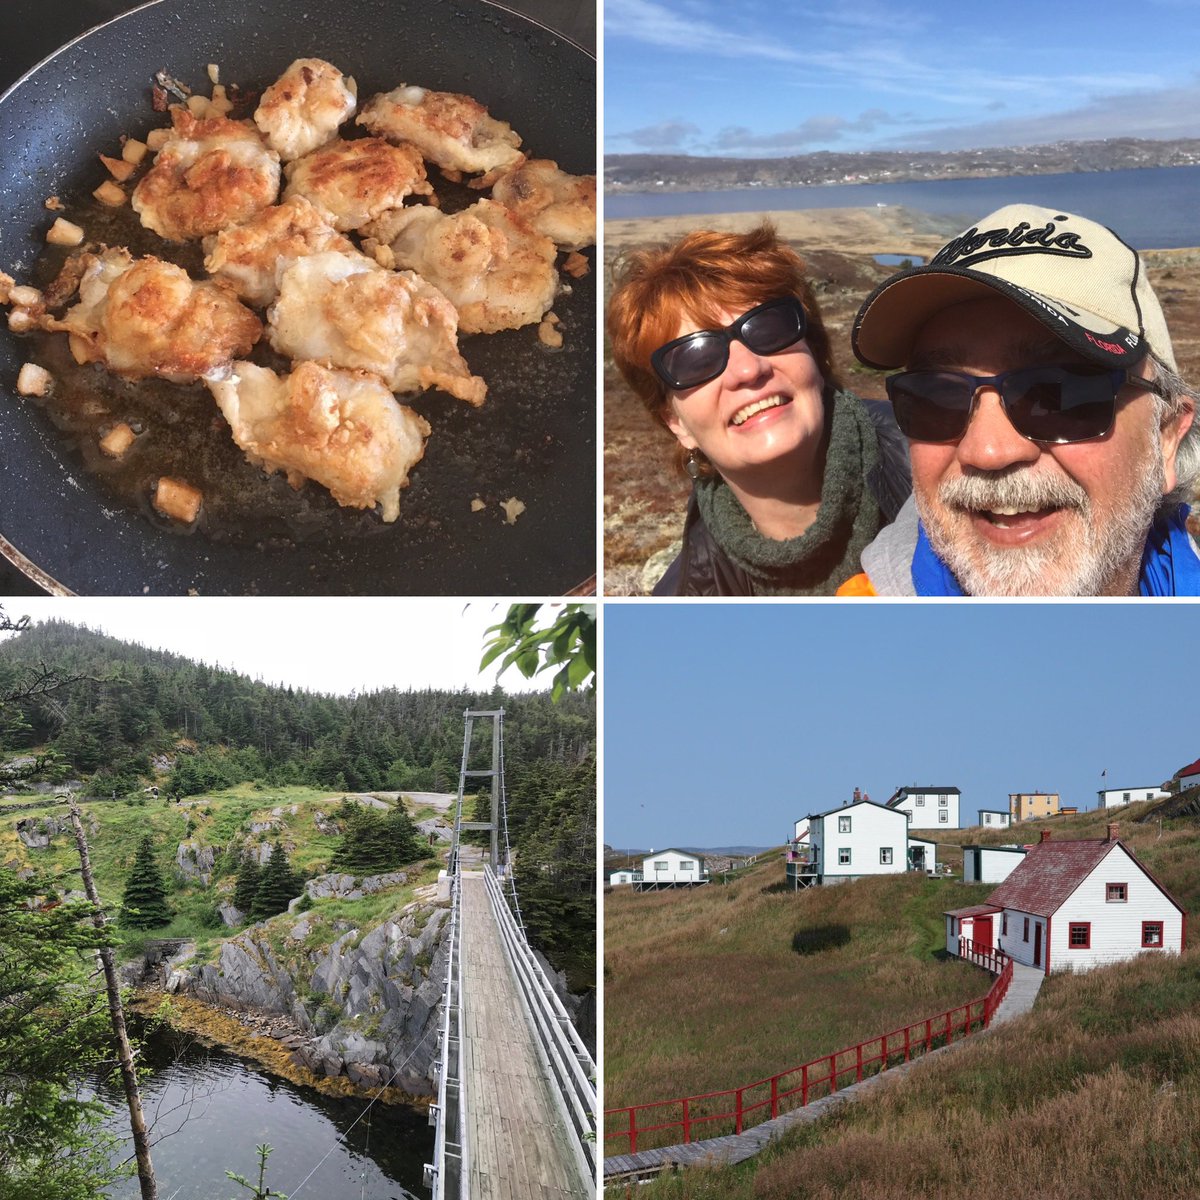 Celebrating “International Day of Happiness”.  Come to Newfoundland and Labrador for the Food, Fun, Hiking and History.  #travel #WILD40YEARS